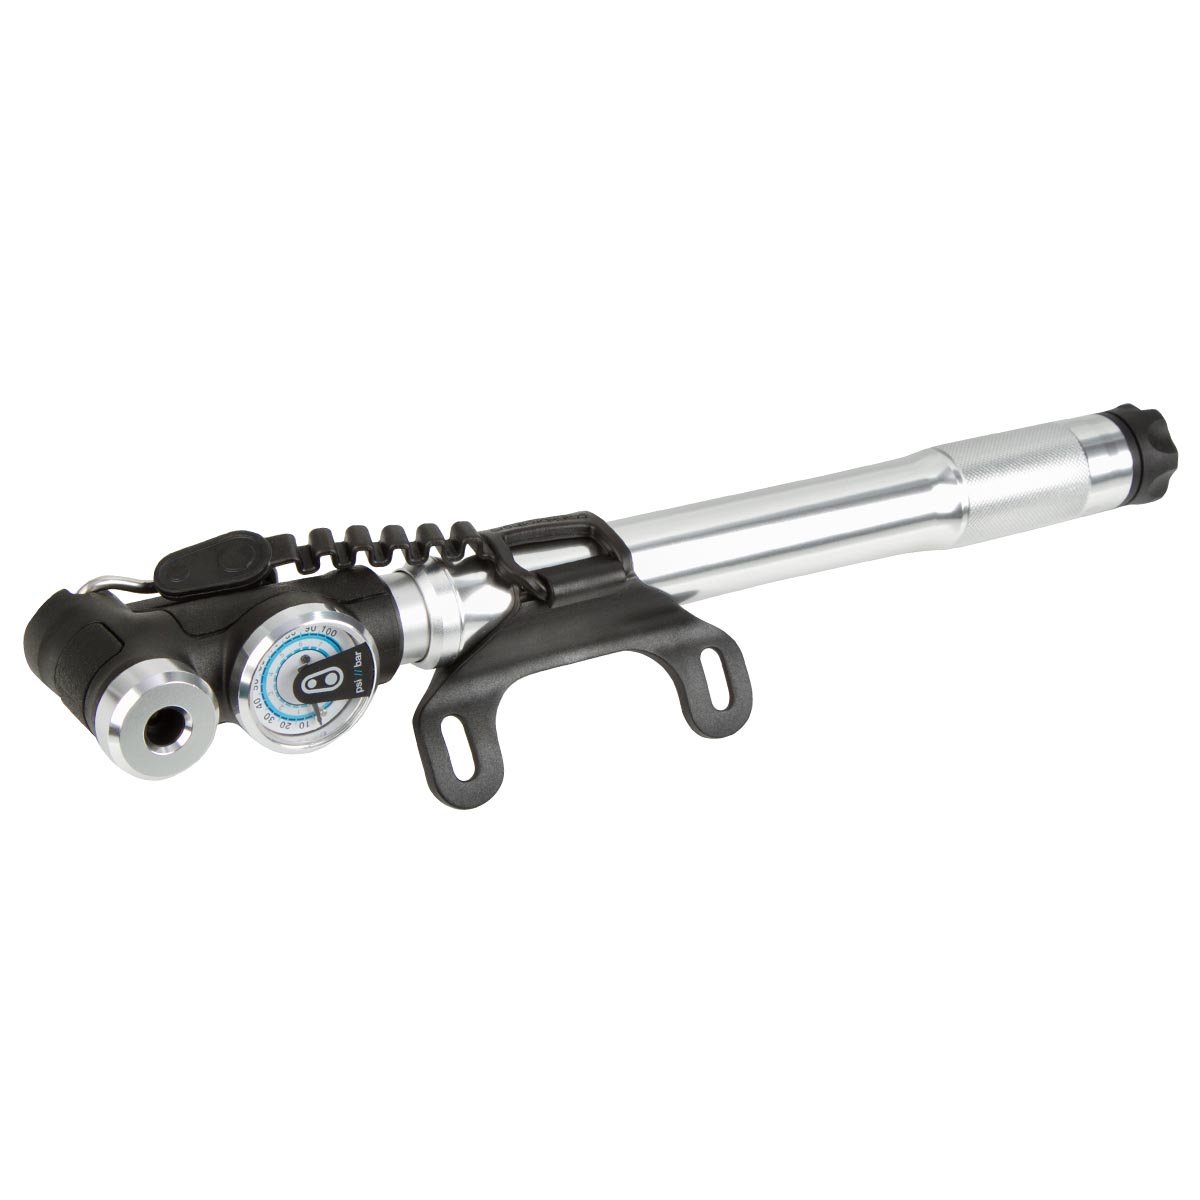 Crankbrothers Pompe à Main Sterling LG analog manometer, incl. frame mounting, Silver